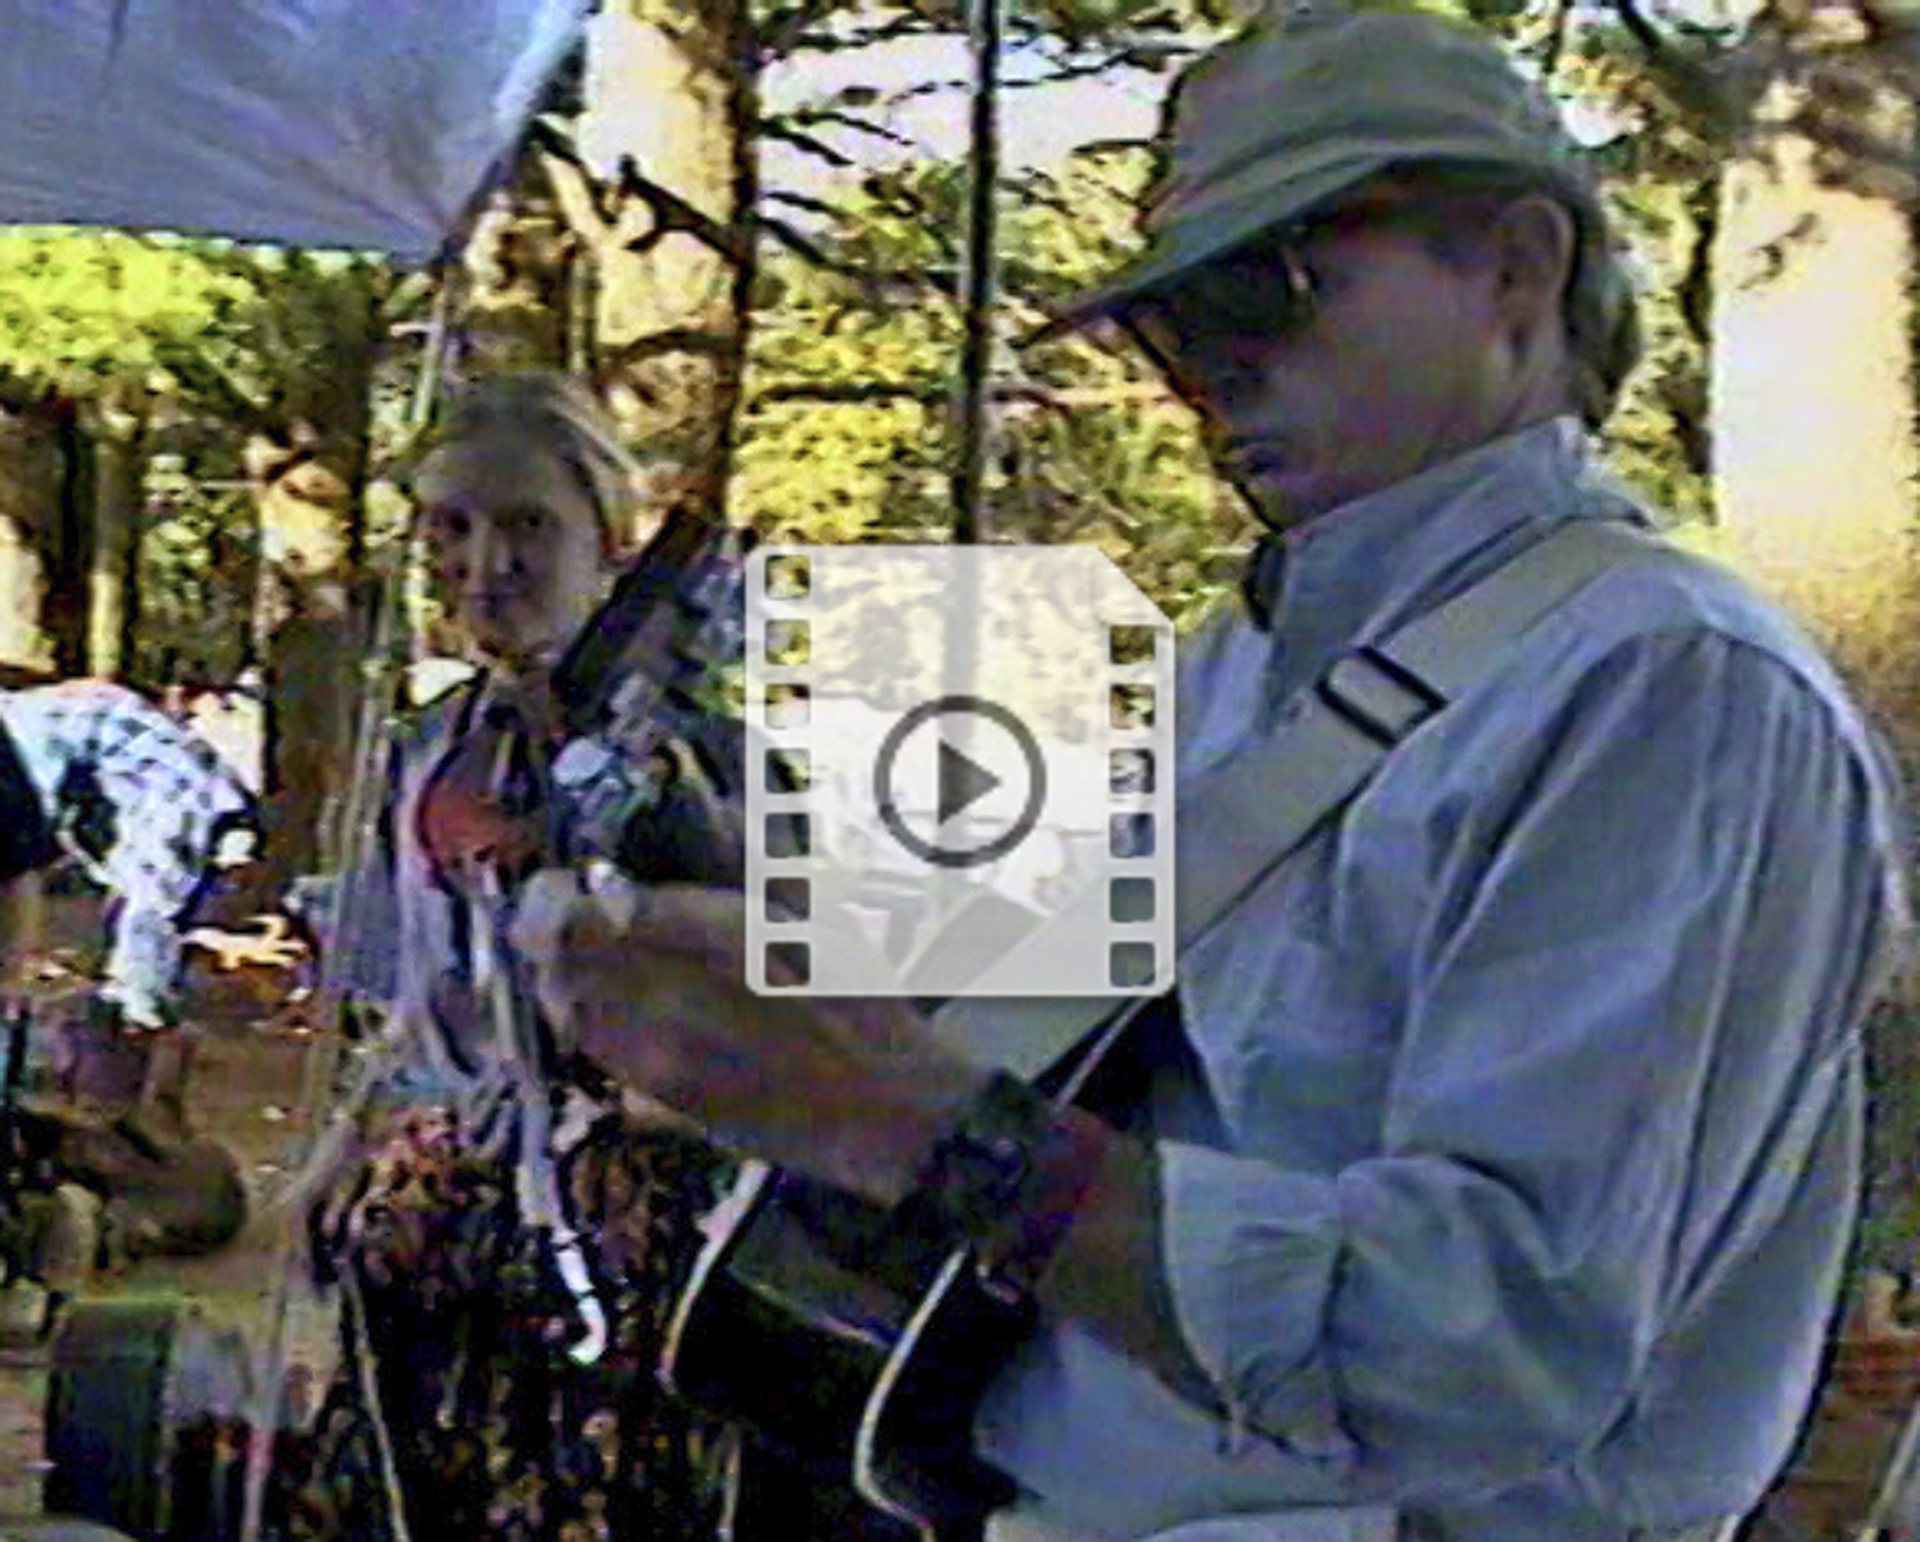 Blues Stay Away From Me Manic Mt. Boys campsite jam on "Blues Stay Away From Me" at the Thomas Pt. Beach Bluegrass Festival over Labor Day weekend 1995. With George Gibson: lead vocal, guitar; Thom Sayers: lead guitar; Joyce Anderson: fiddle; Jamie Peghiny: guitar; Catya von Korolyi: bass. Background appearances by Todd Shattuck, Betsy Rome, Lisa Sayers, and Stuart Rocheford. Special guest appearance by Patty Mason and her dancing dog (and other parts). And to set the record straight, I inherited this video from Maggie Bender and did not shoot it myself!